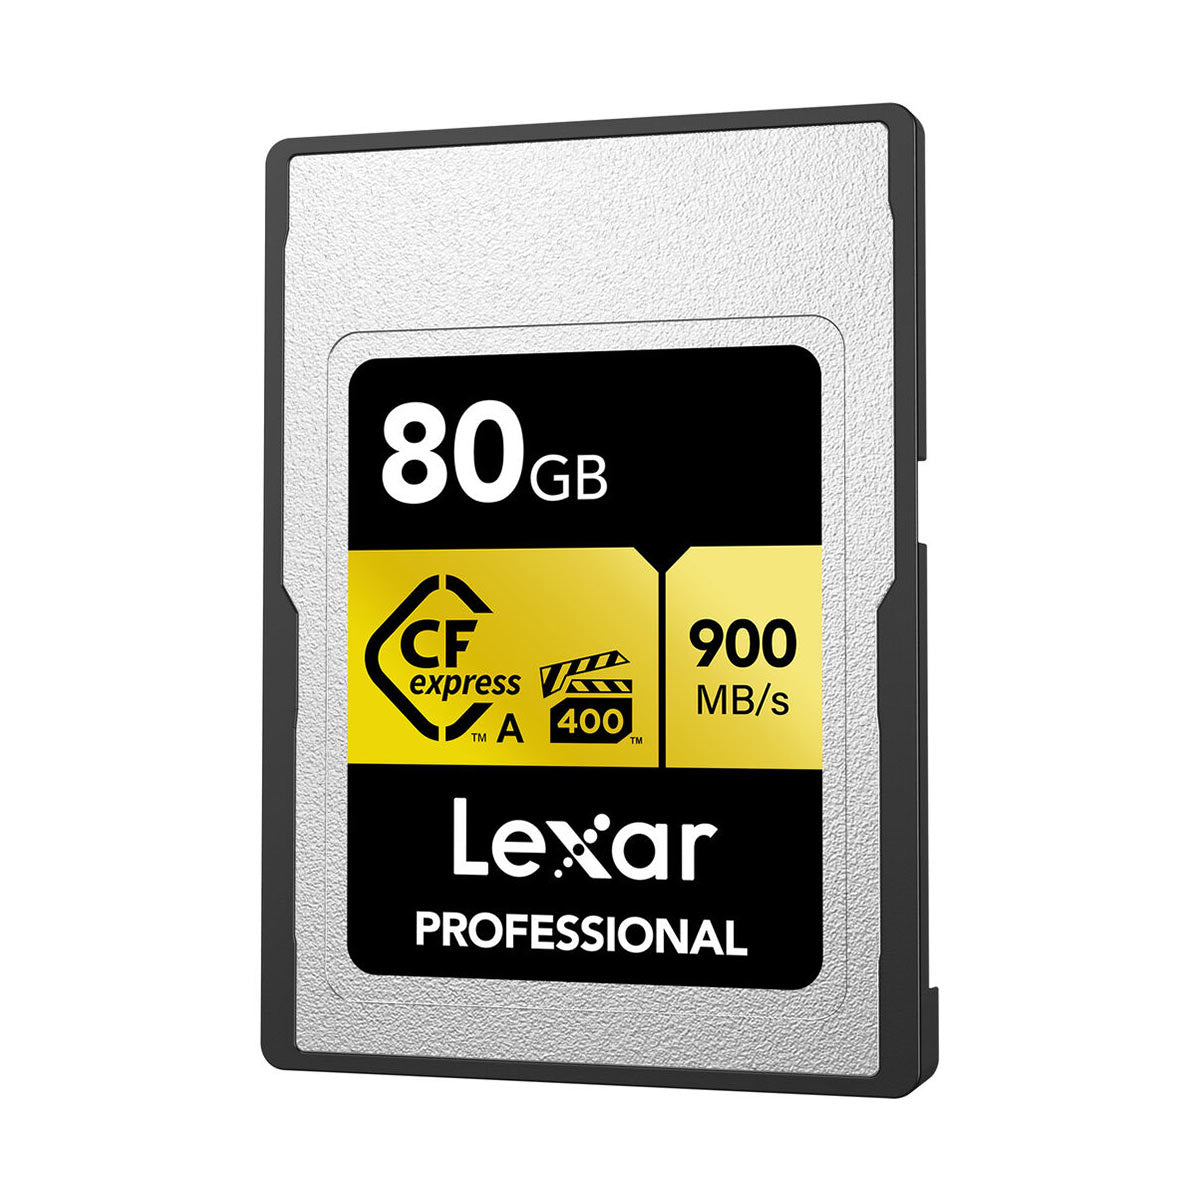 Lexar 80GB Professional CFexpress Type A Memory Card (Gold Series) (VPG 400)